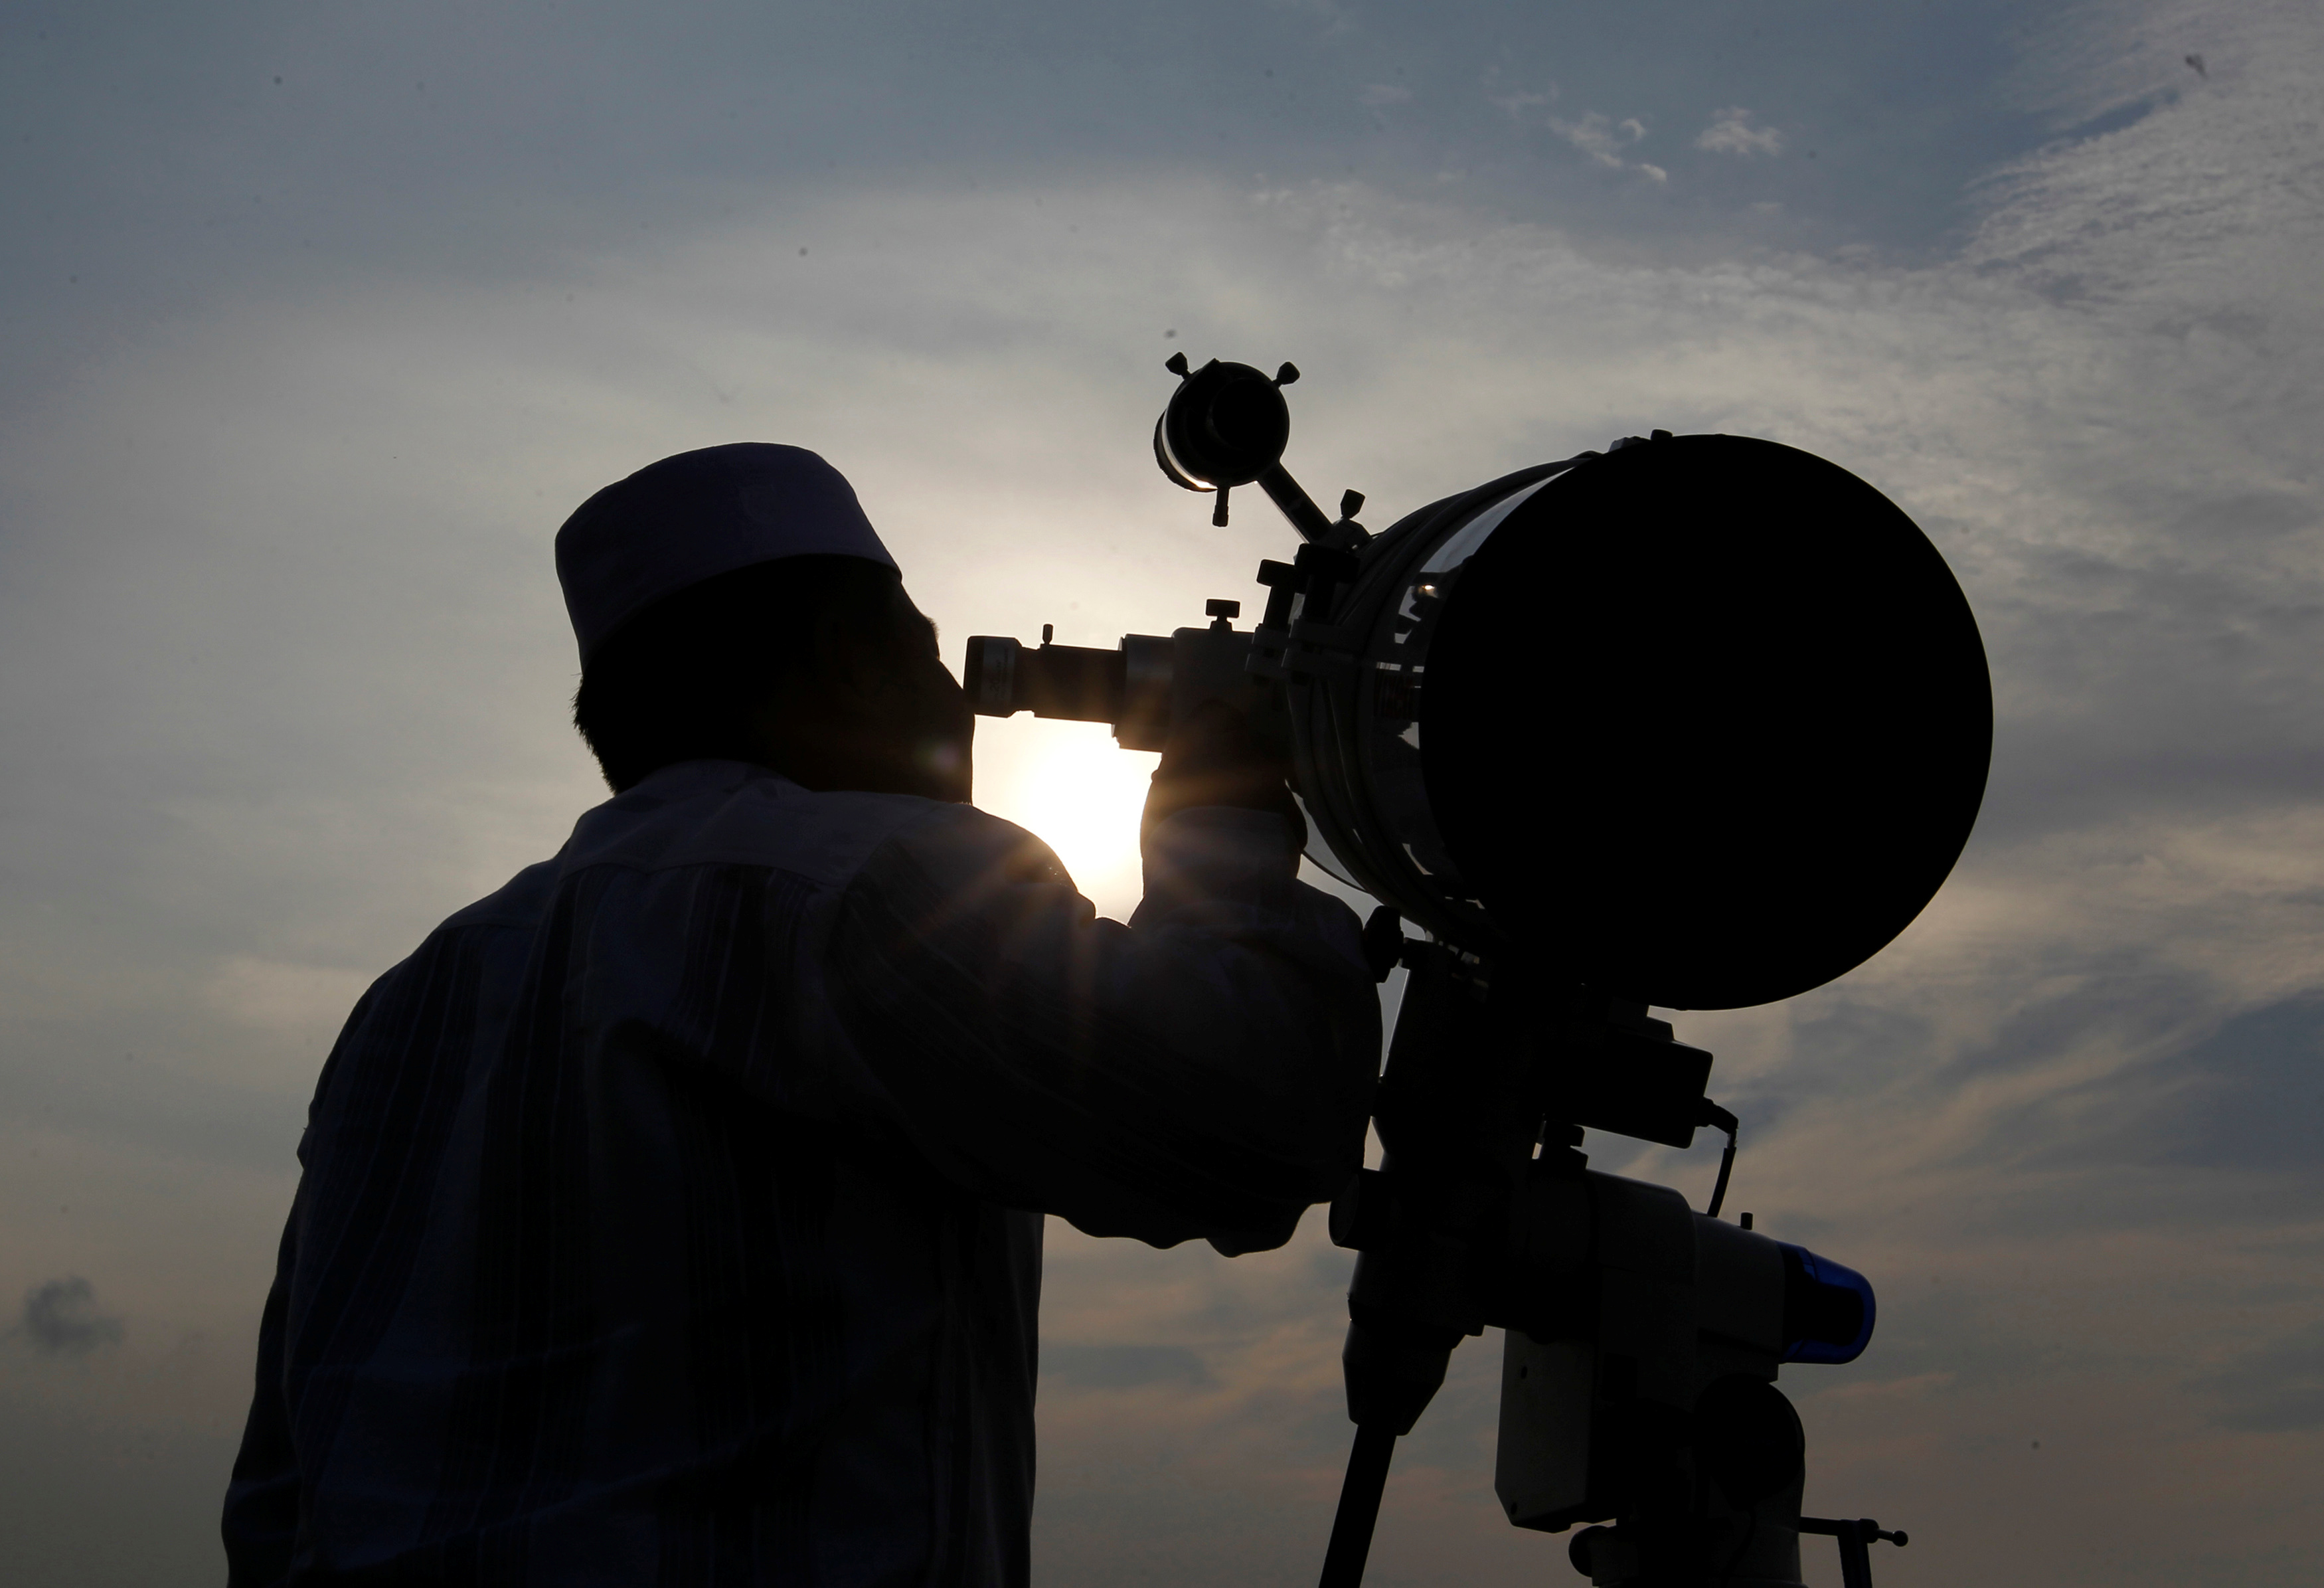 A Muslim man uses a telescope to observe the moon before the Muslim holy month of Ramadan at Al-Musyari'in mosque in Jakarta, Indonesia on June 5, 2016. (Iqro Rinaldi–Reuters)